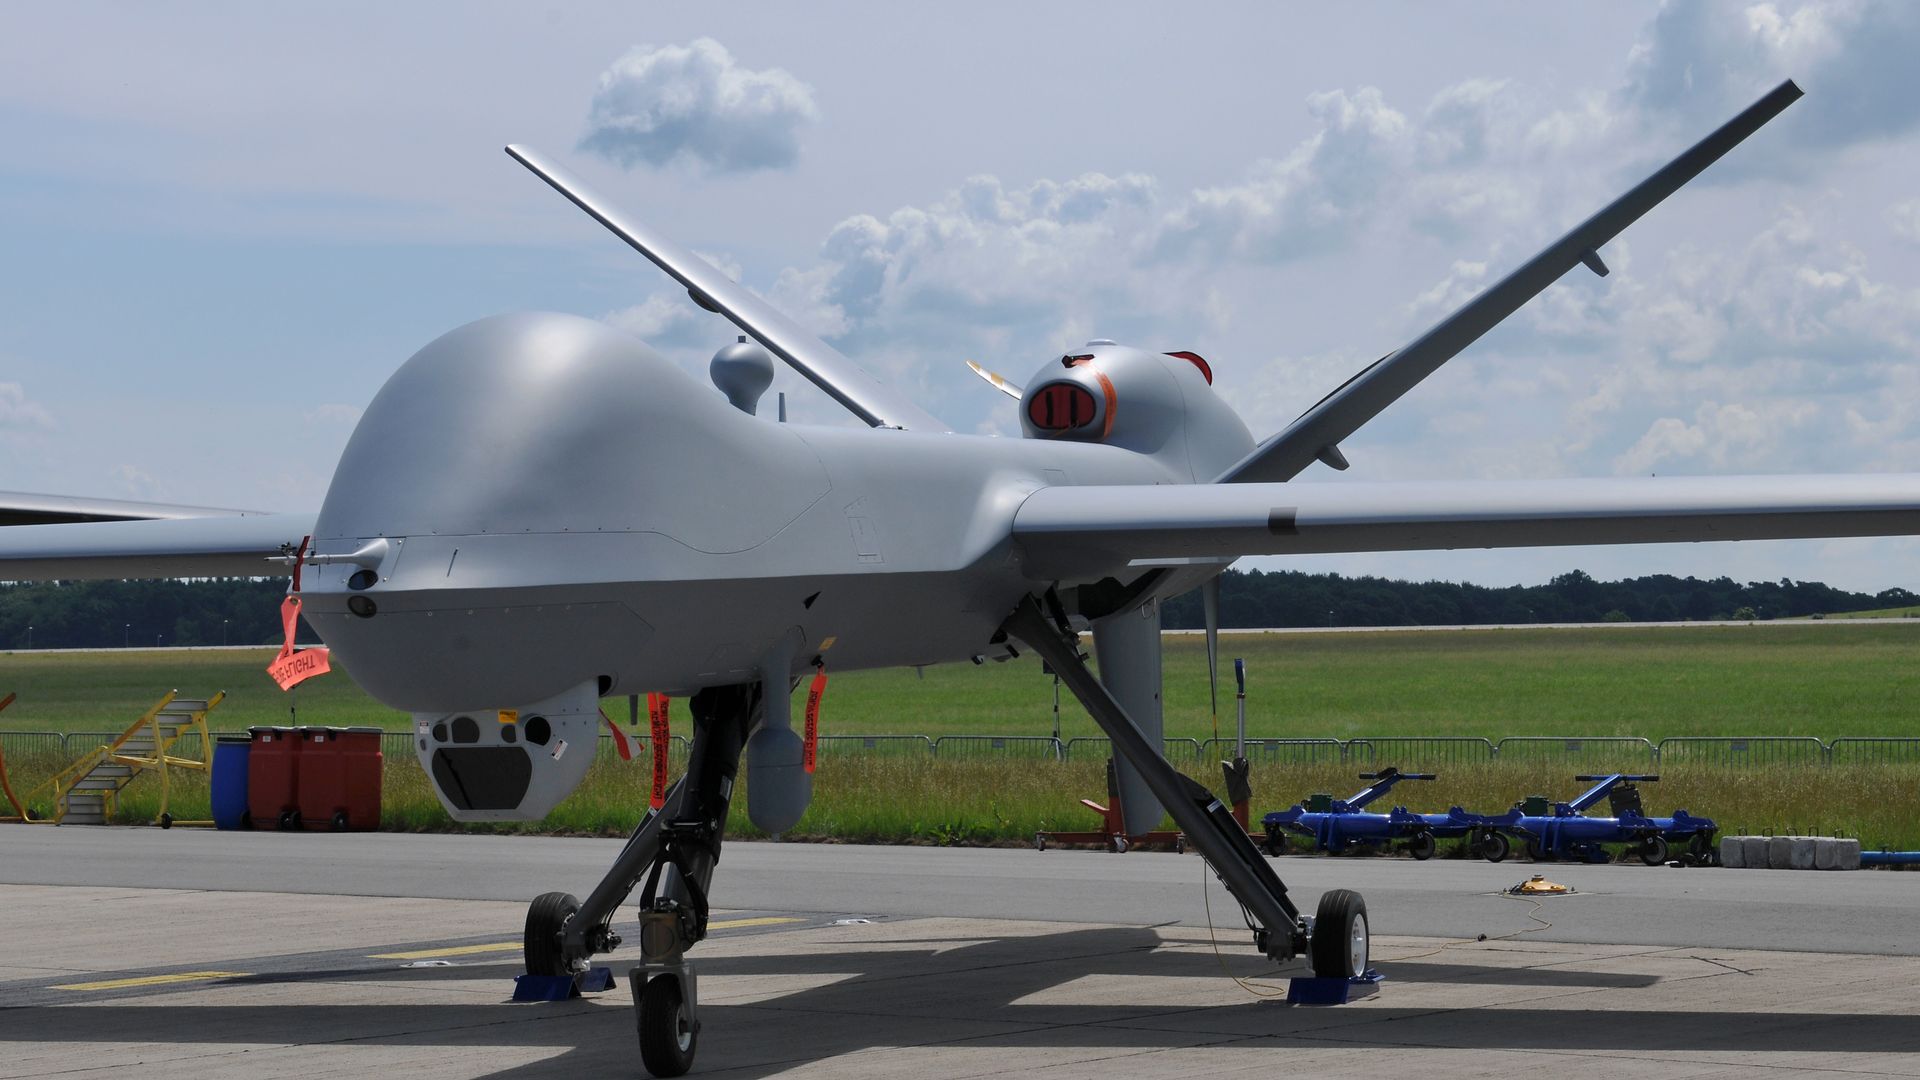 The U.S. Air Force says the story about a rogue AI drone attacking and killing its operator during a simulated test was just a hypothetical.